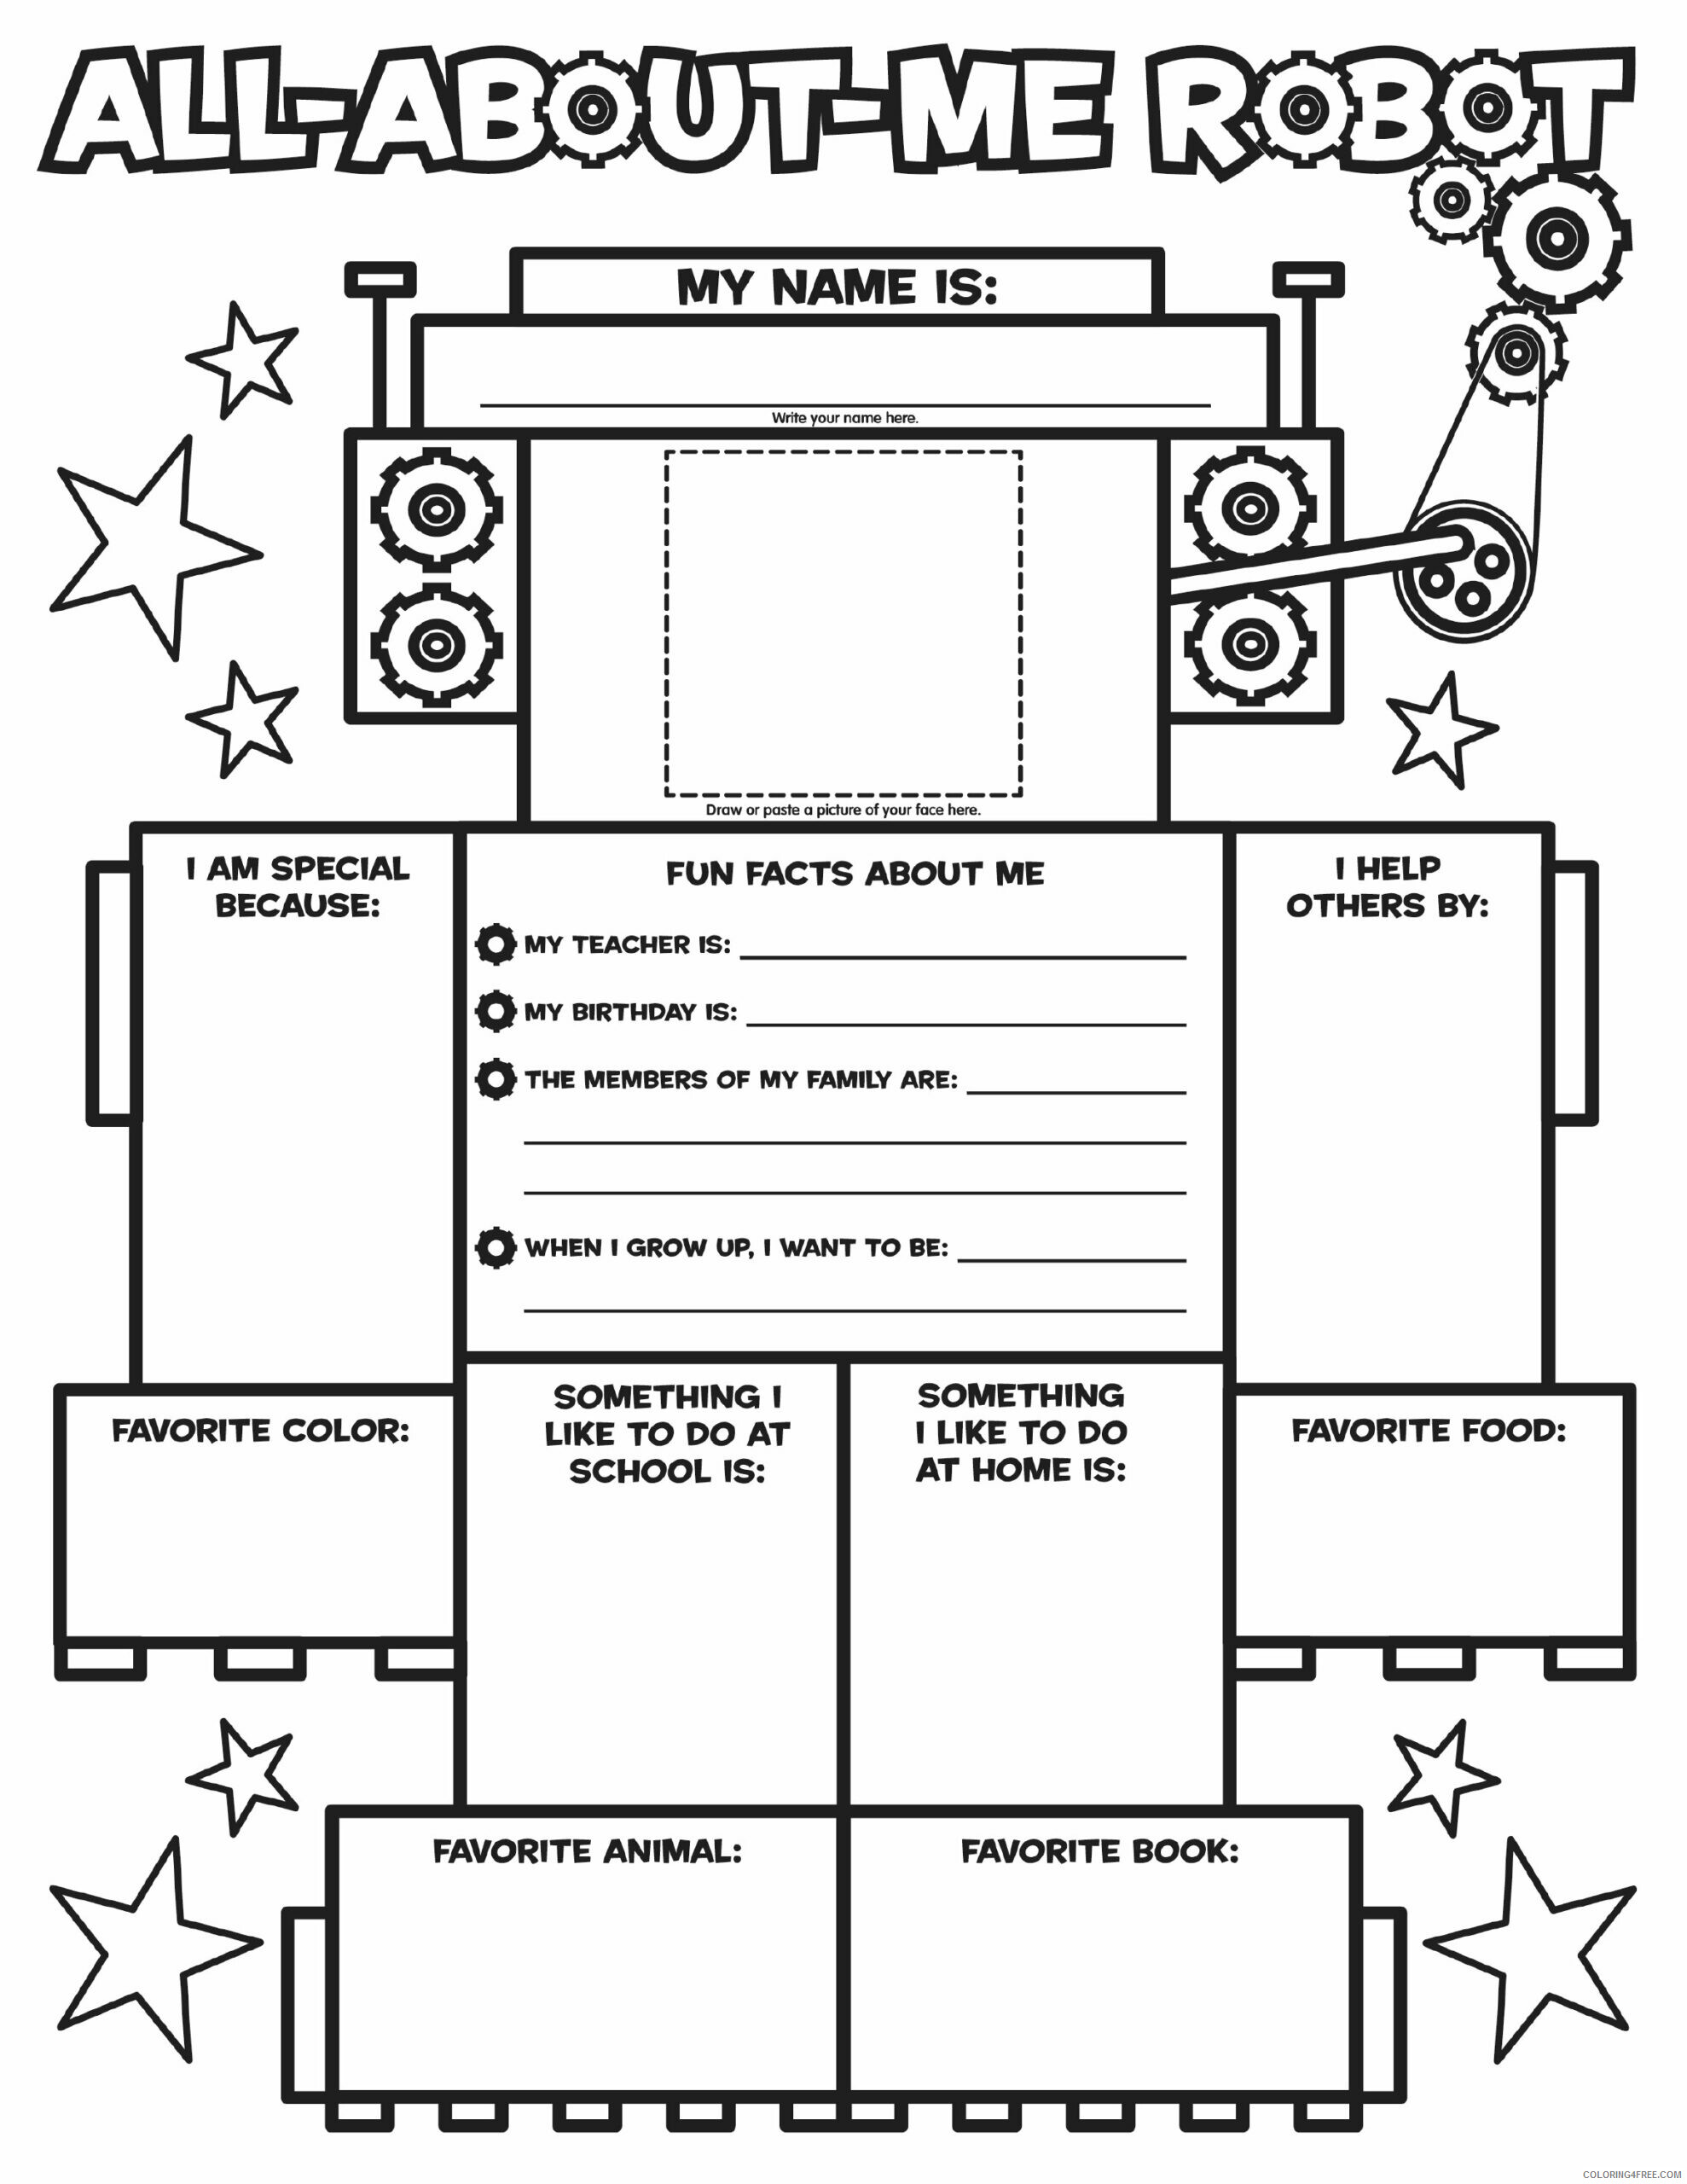 All About Me Coloring Pages Printable Sheets All about me robot coloring 2021 a 3882 Coloring4free